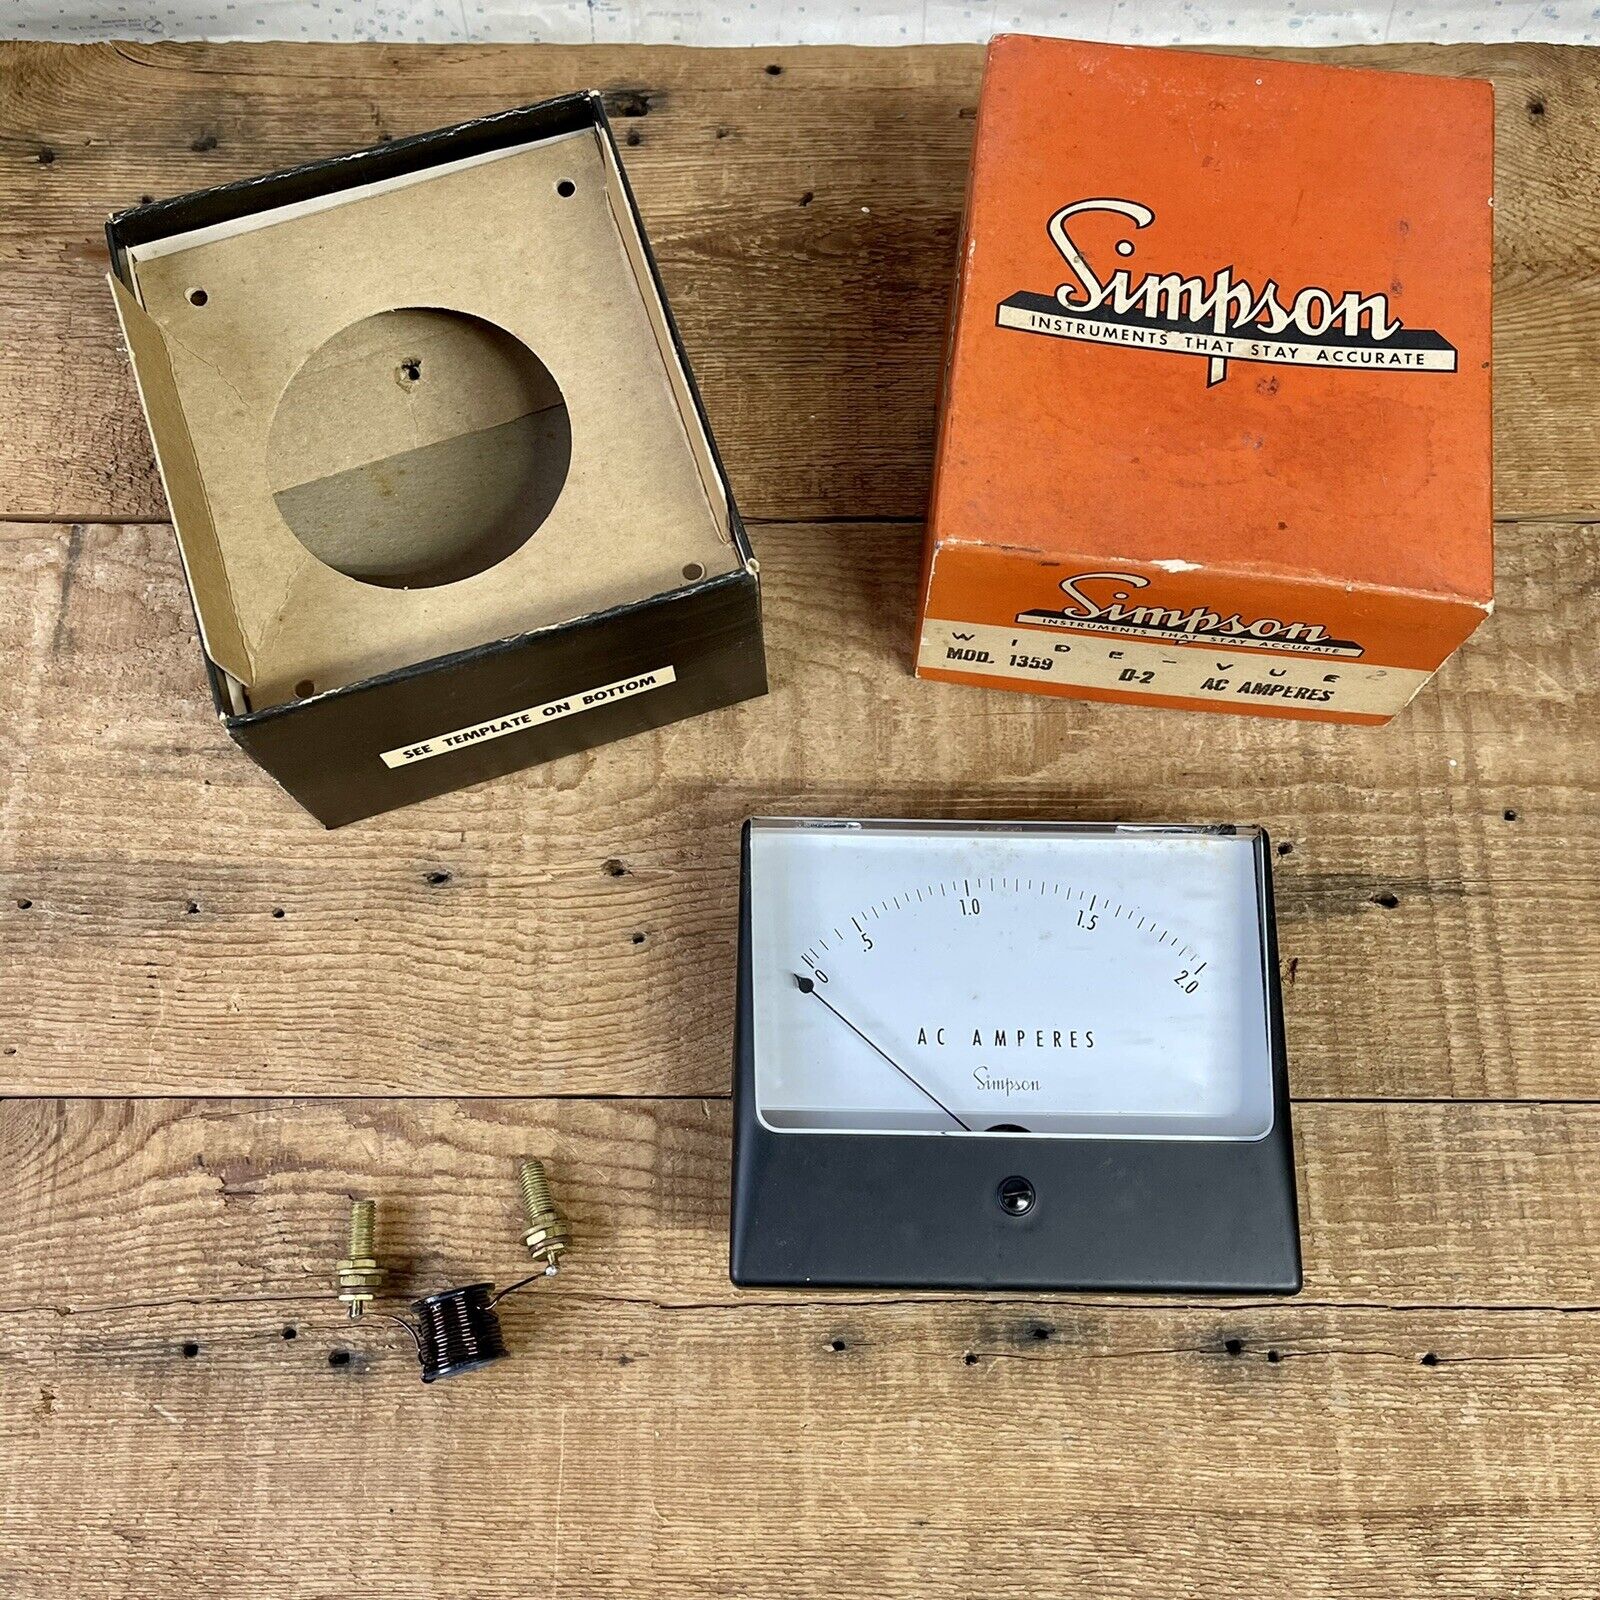 Simpson Wide Vue D-2 Model 1359 Gauge 0-2.0  Ac Amperes With Box- Untested